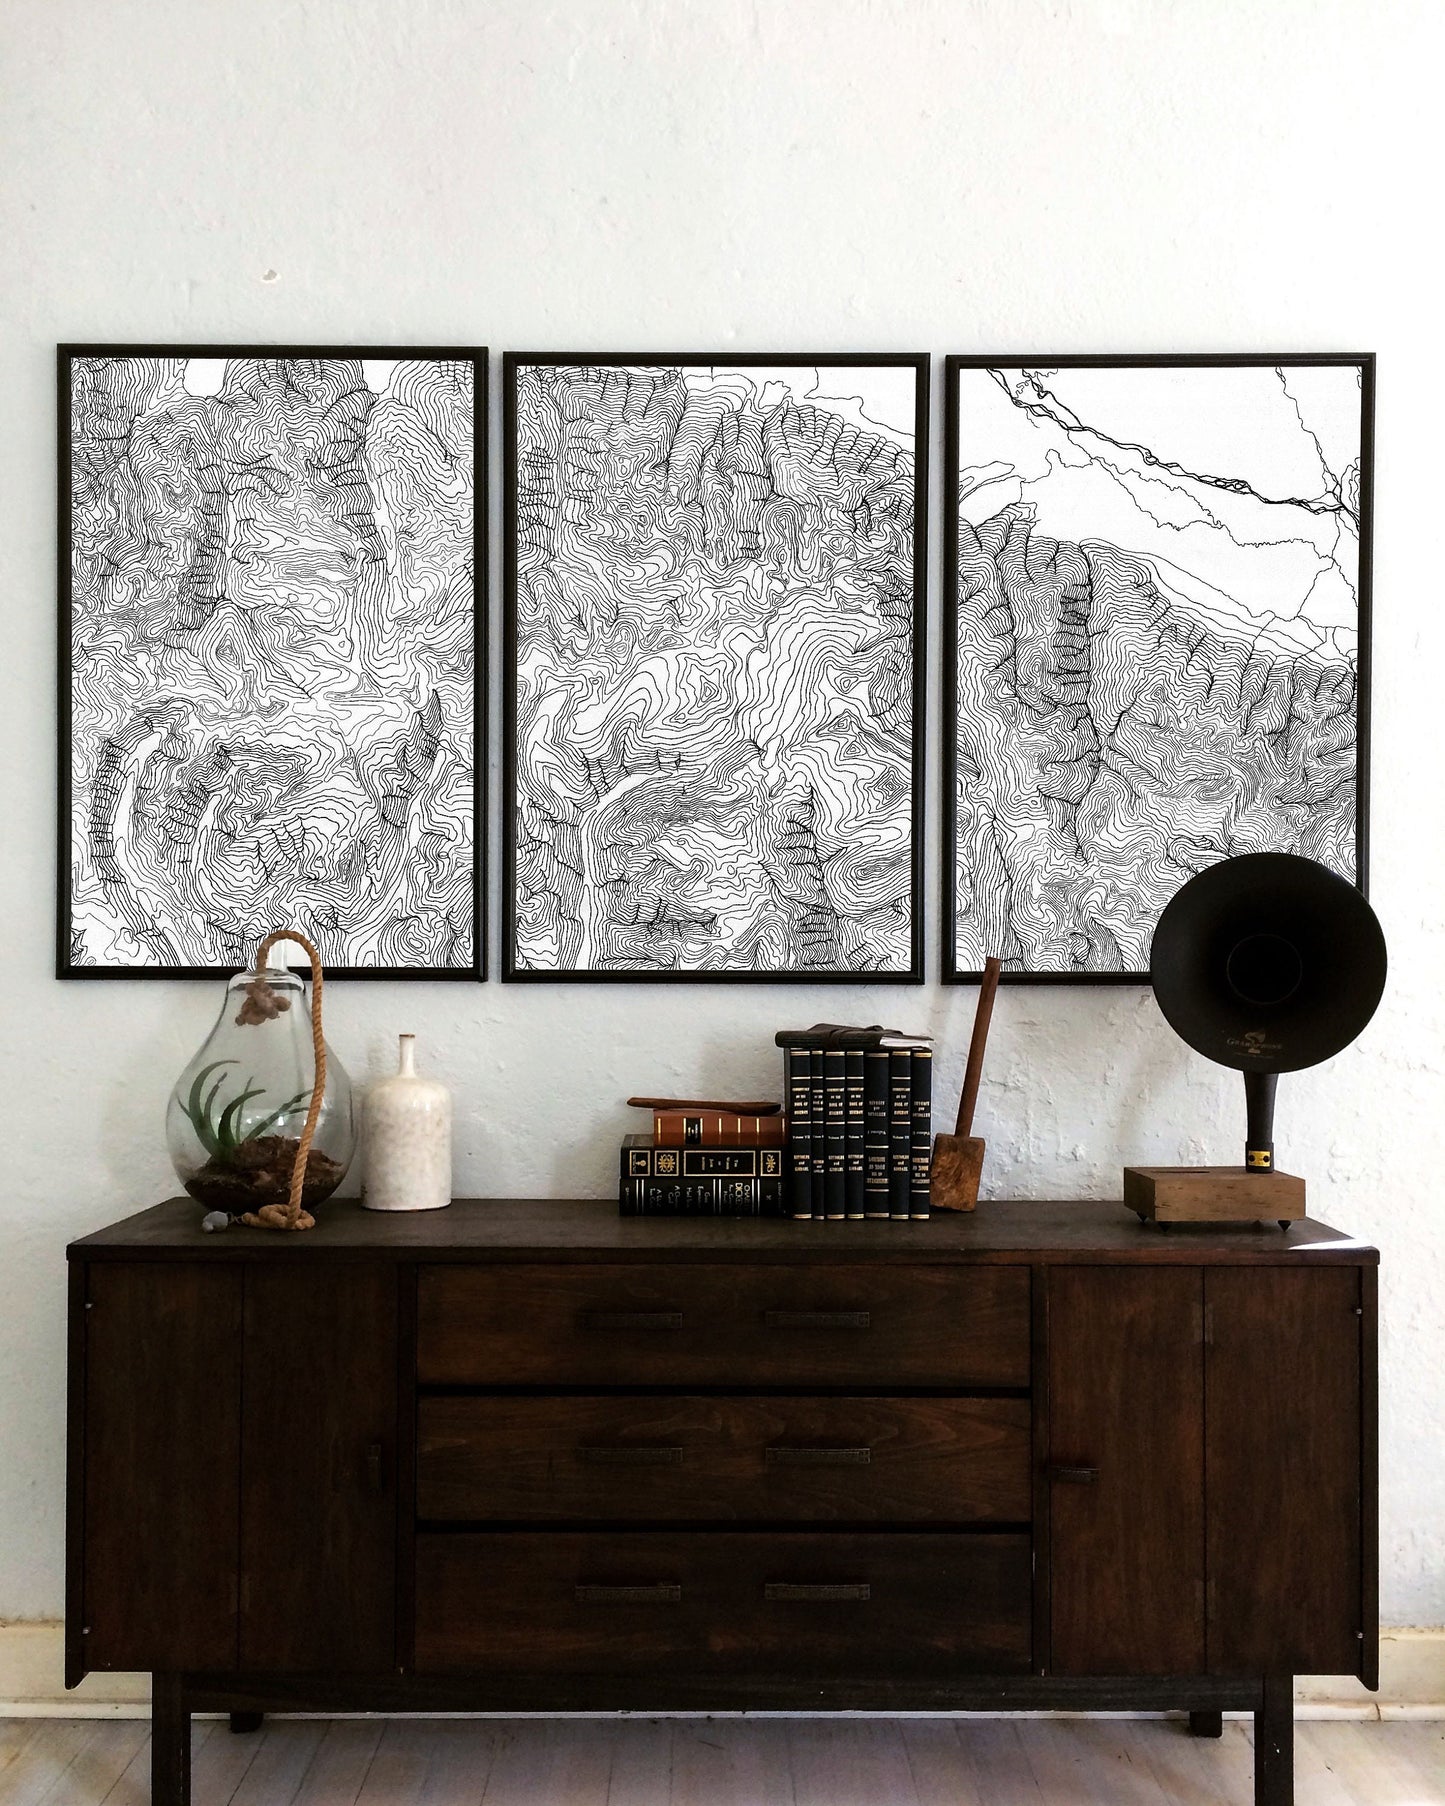 Grand Teton Topographical Map Set of 3 - 24x36 inch giclee prints